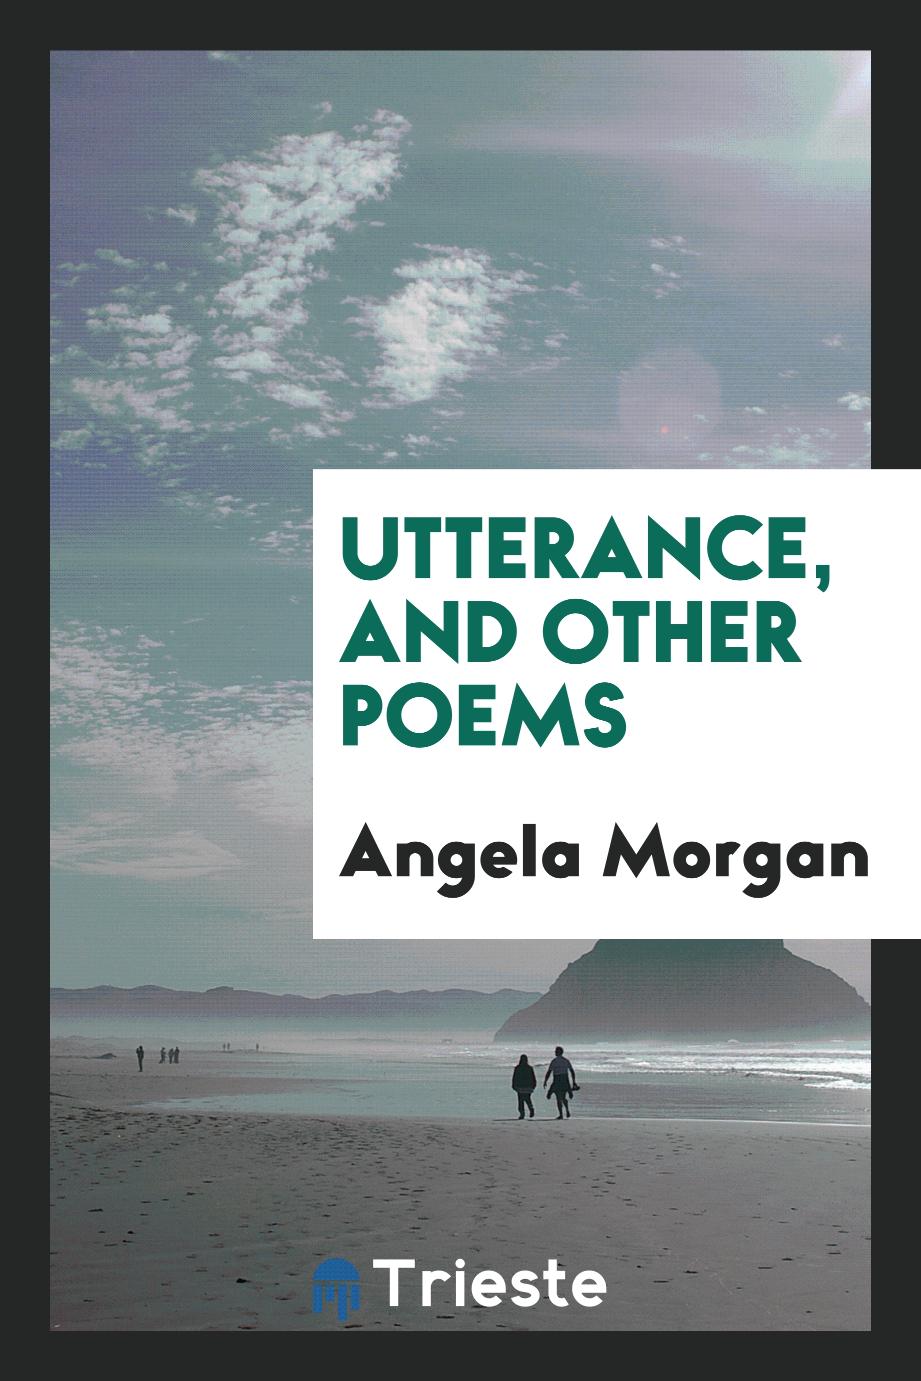 Utterance, and other poems